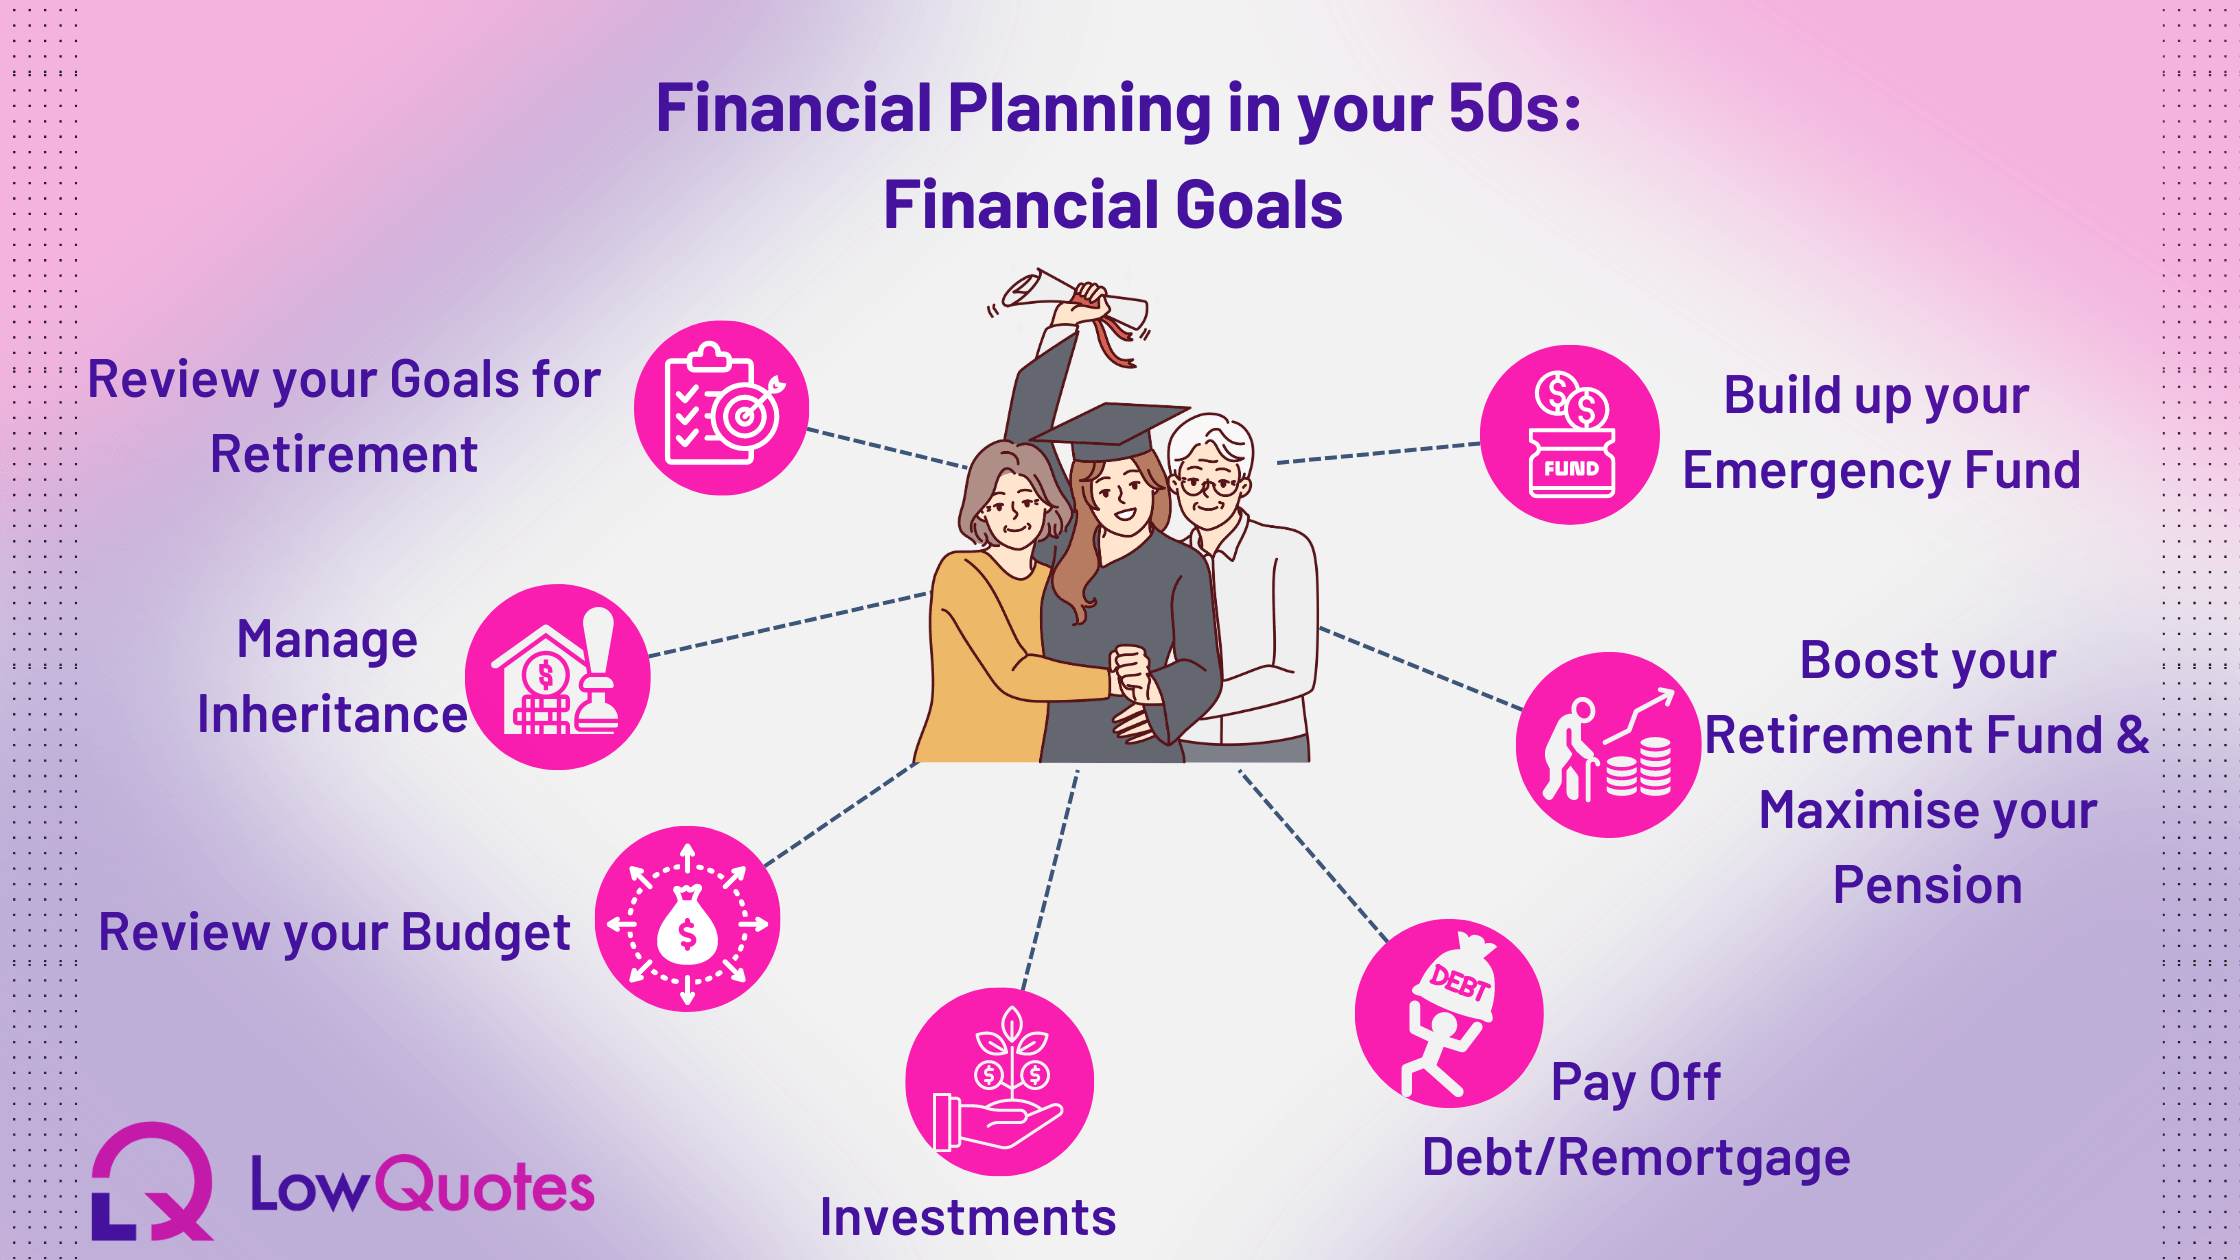 Financial Planning in your 50s - LowQuotes